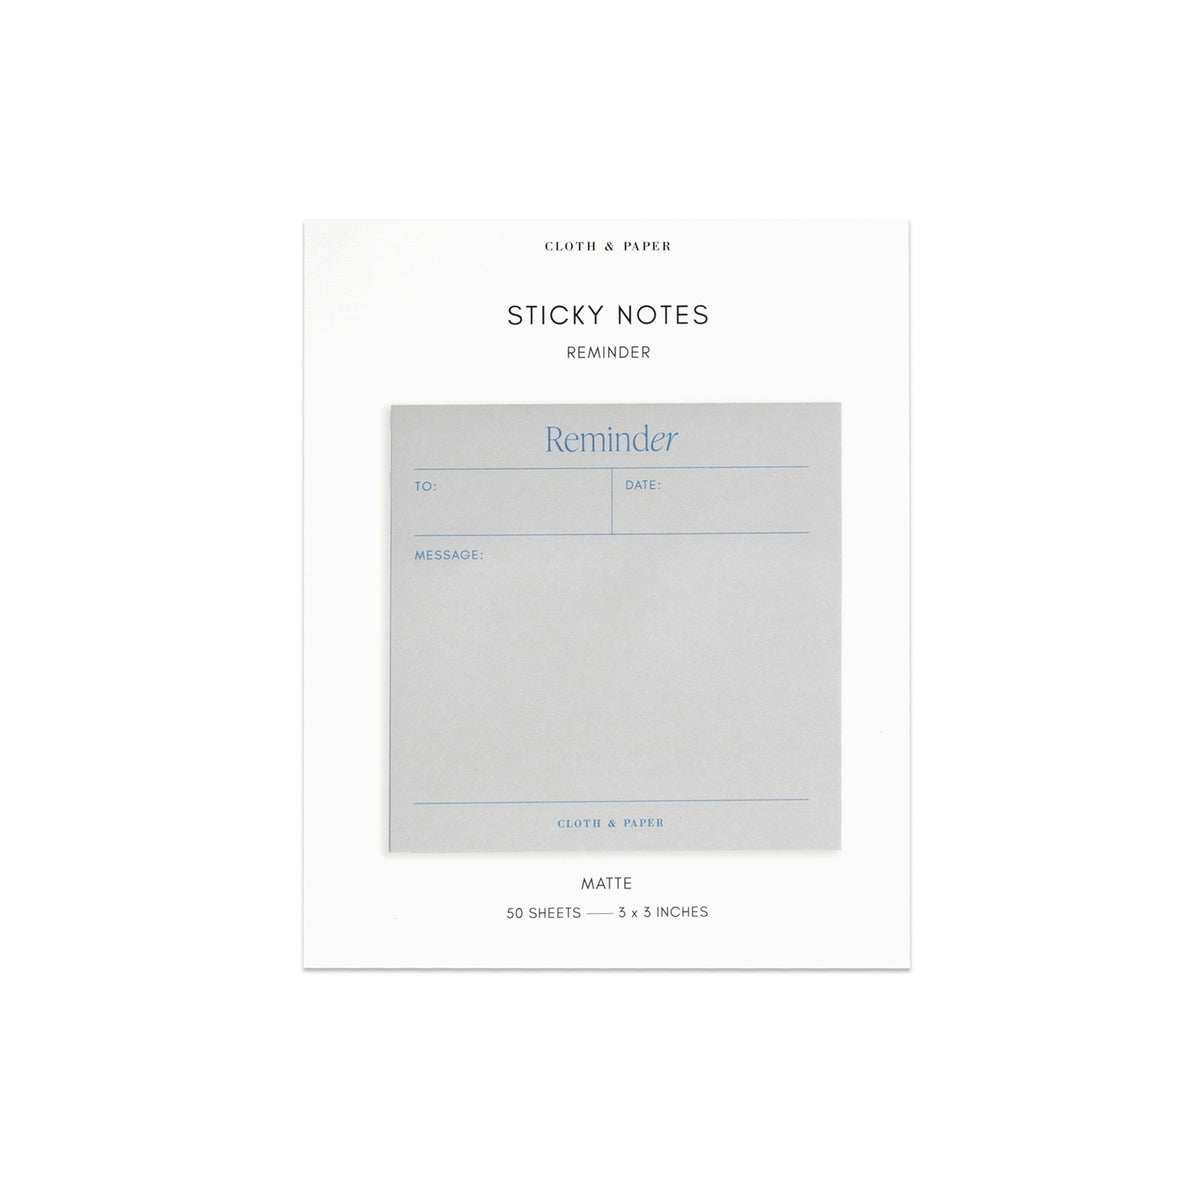 Reminder Sticky Notes  Cloth & Paper – CLOTH & PAPER